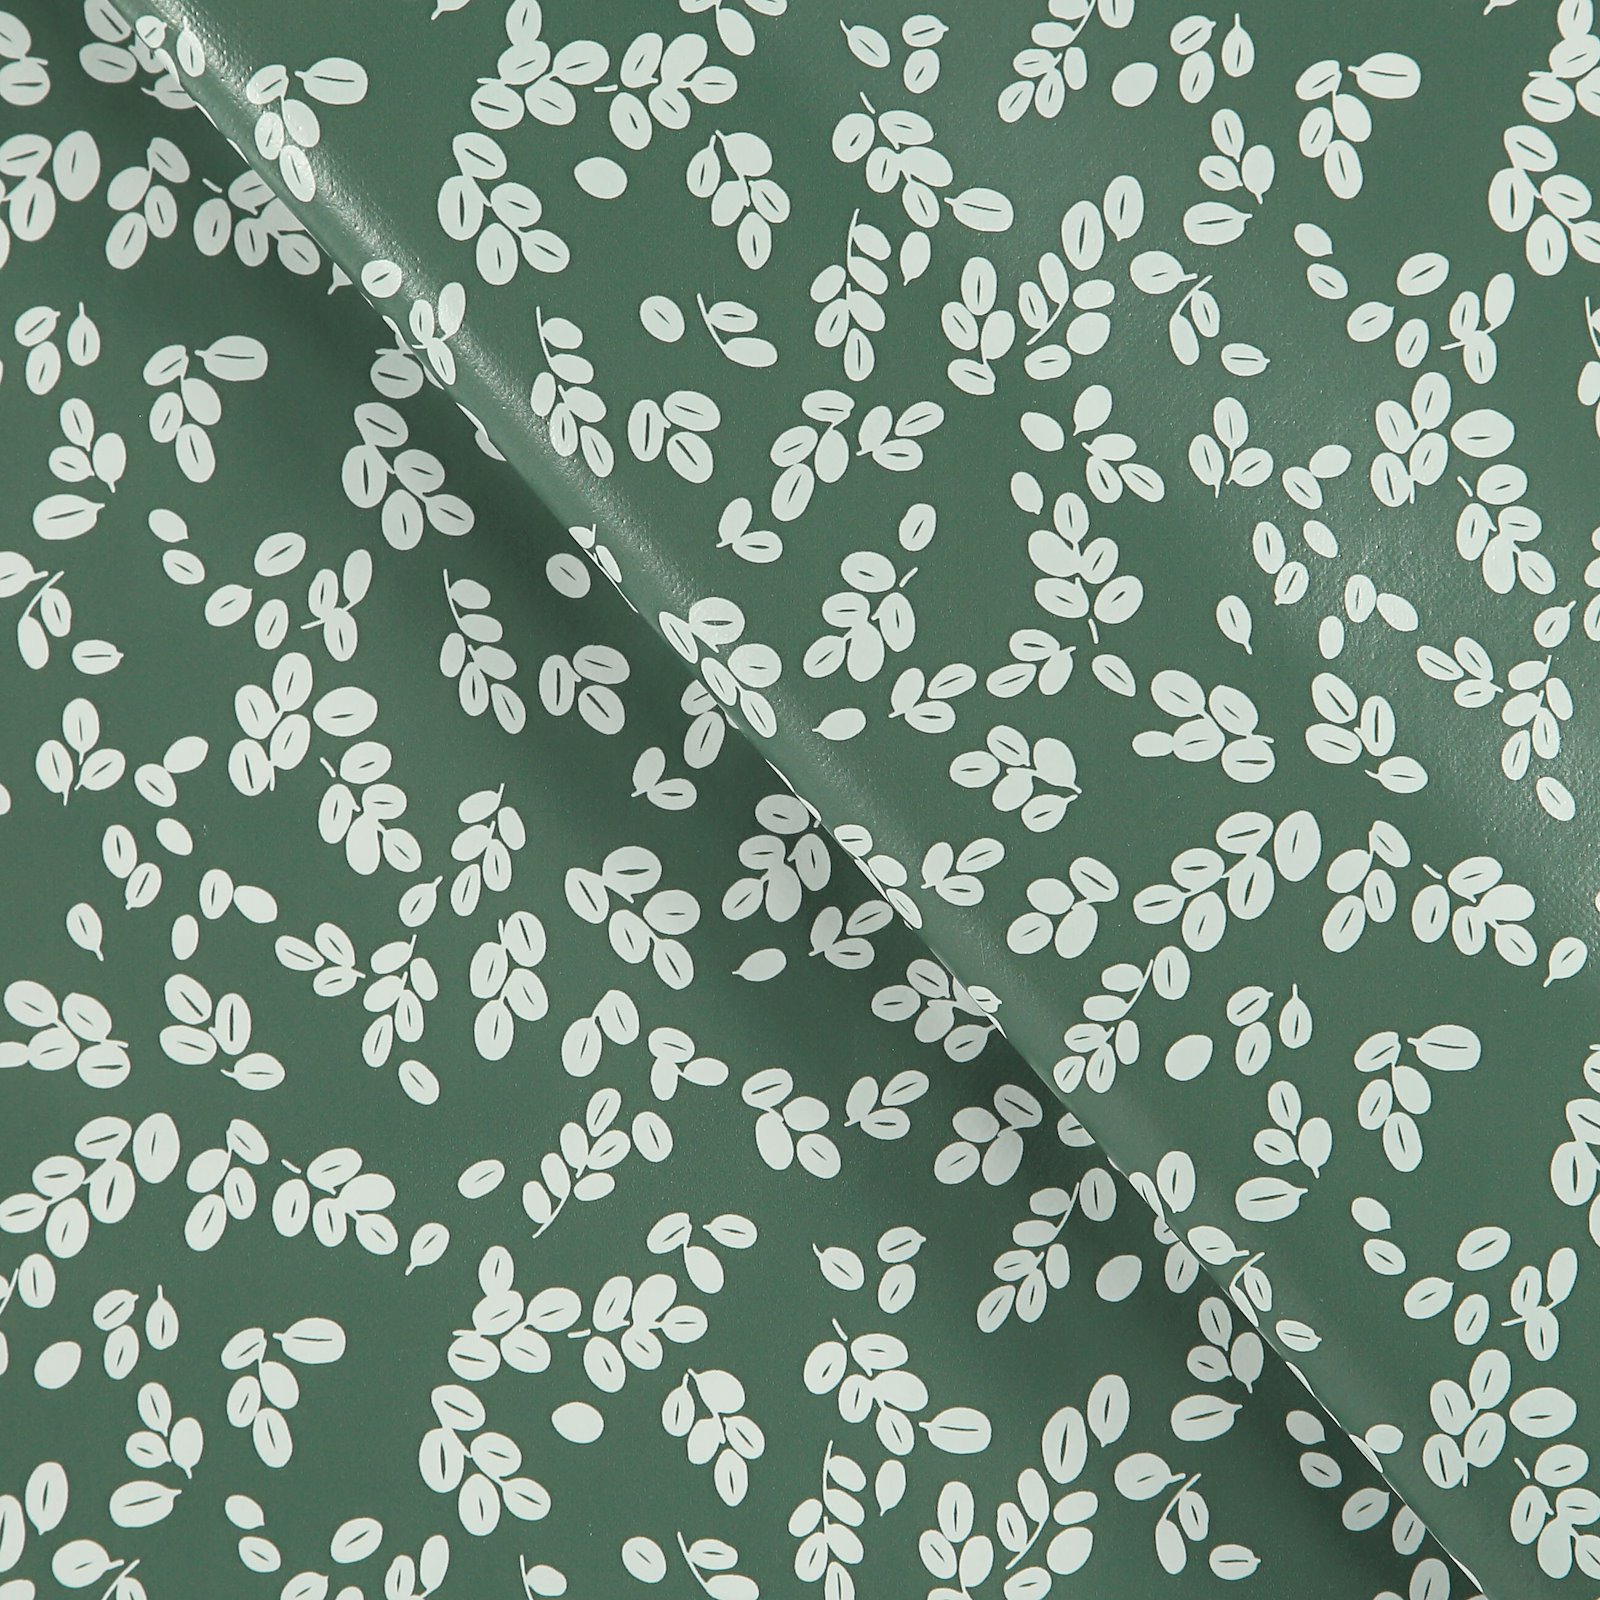 Non-woven oilcloth green w white leaves 866129_pack